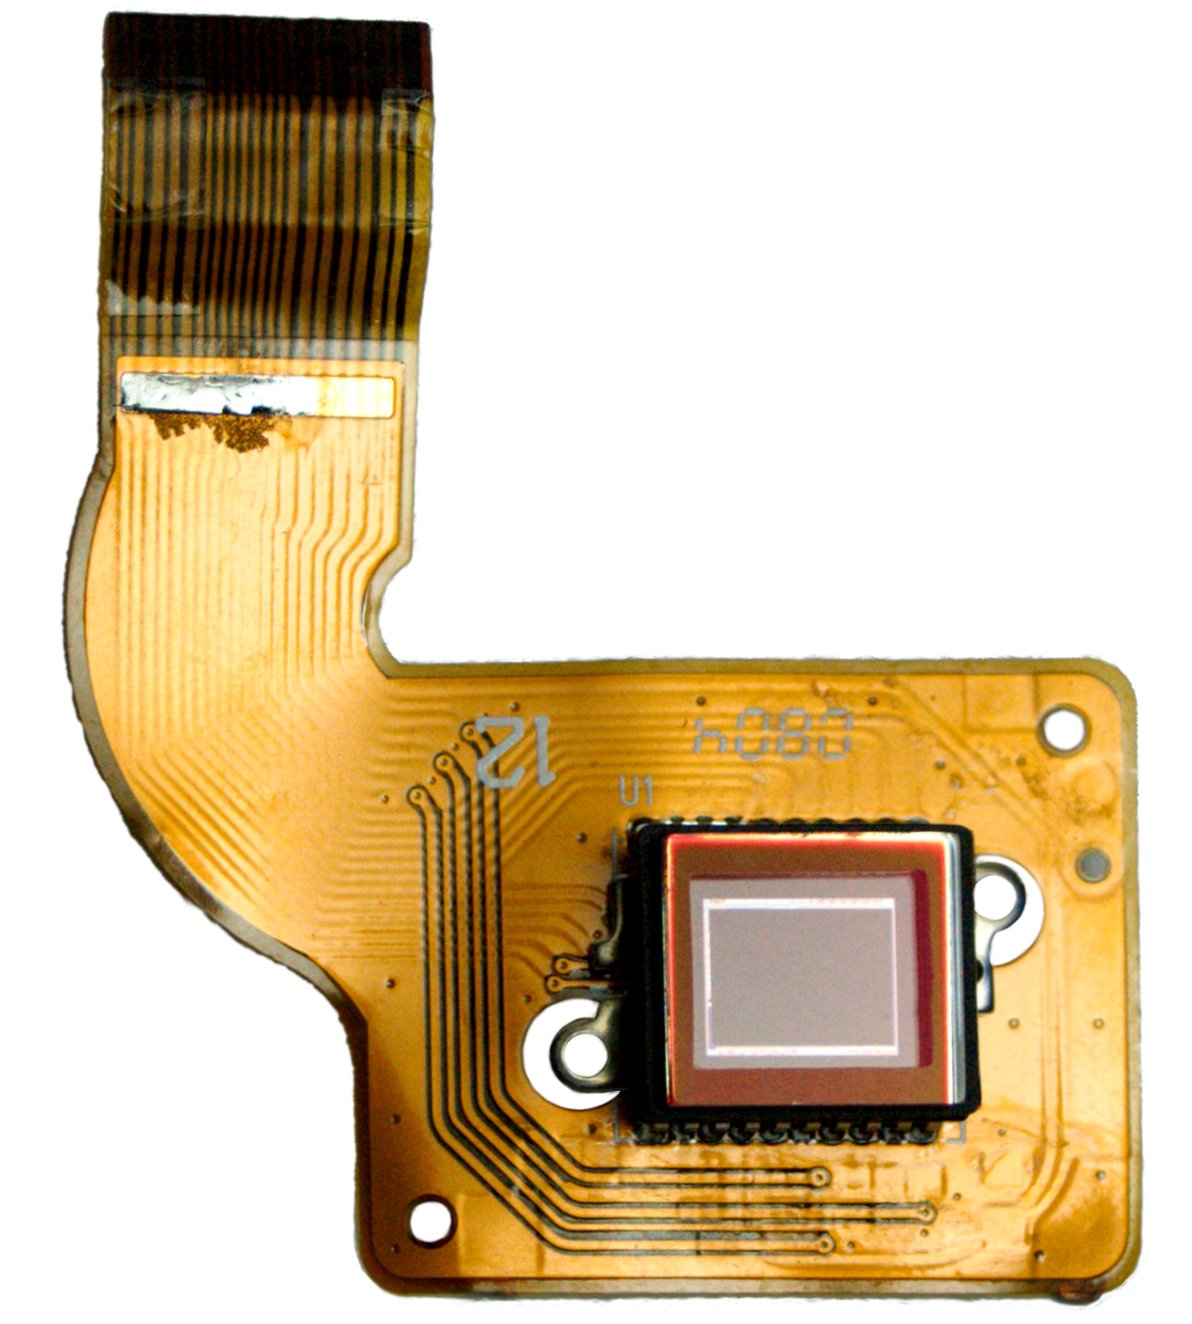 Asia Pacific Image Sensor Market – Industry Analysis and Forecast (2017-2026)